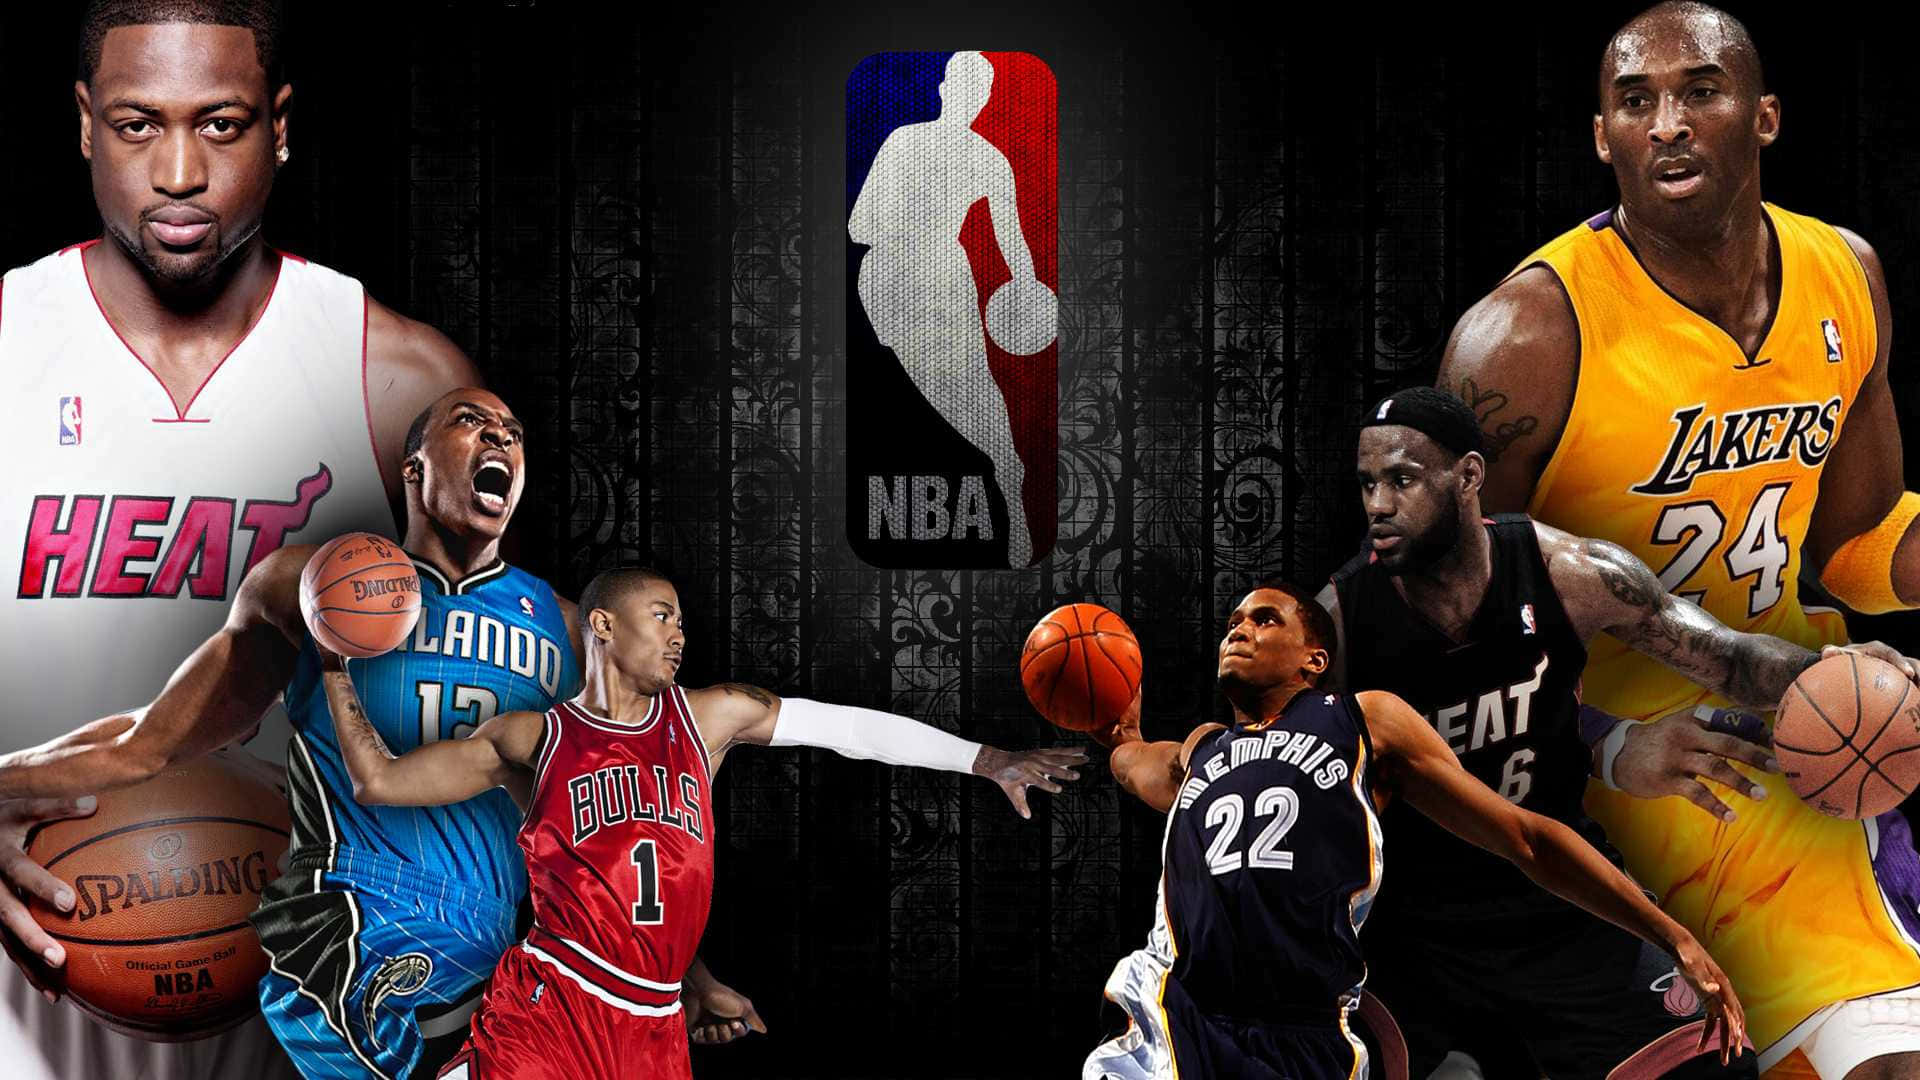 Celebrating The Best Of The Nba!